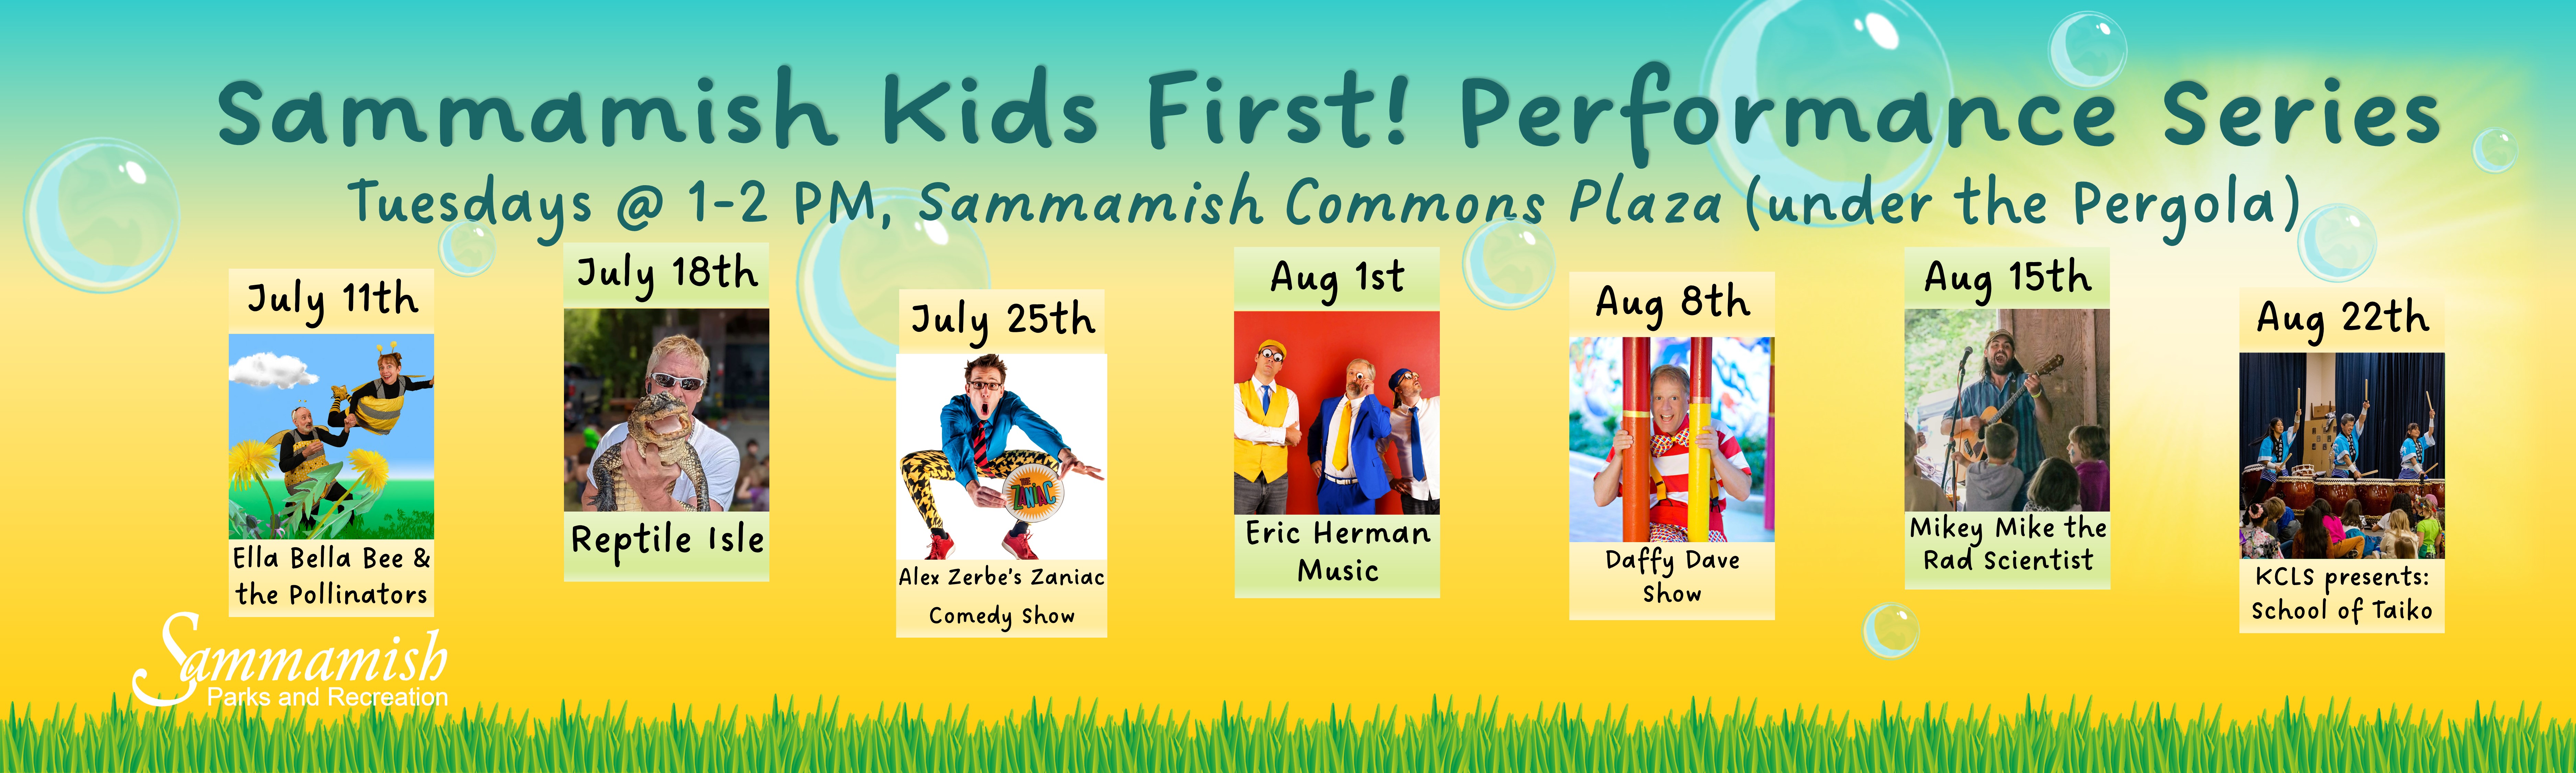 Sammamish Kids First! Performance Series, Tuesdays at 1-2 p.m. Sammamish Commons Plaza (under the pergola). July 11th Ella Bella Bee & the Pollinators, July 18th Reptile Isle, July 25th Alex Zerbe’s Zaniac Comedy Show, August 1st Eric Herman Music, August 8th Daffy Dave Show, August 15th Mikey Mike the Rad Scientist, August 22nd King County Library System presents School of Taiko.